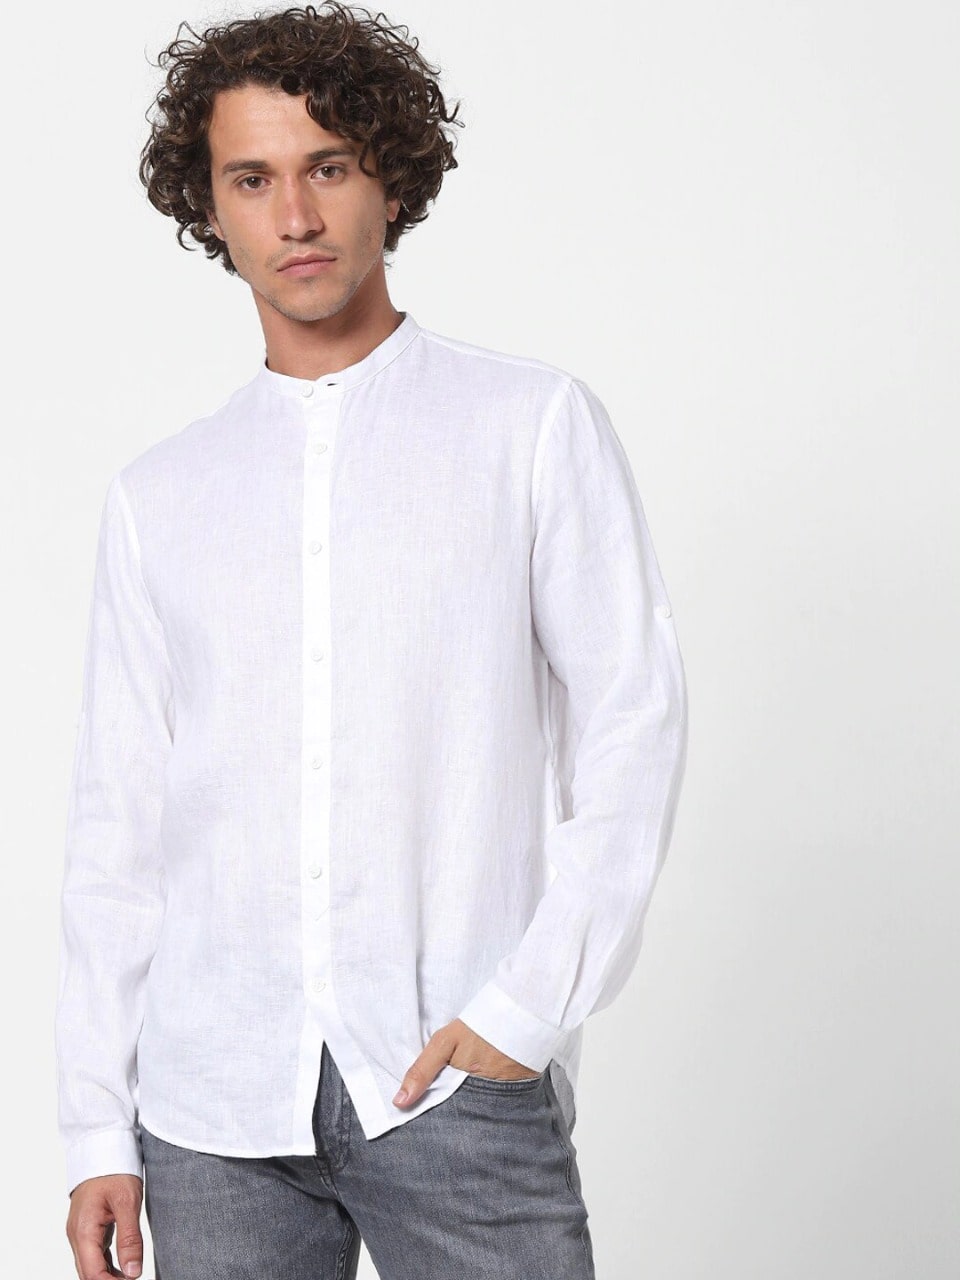 11 Best Collarless Shirts For Men In India For 2022